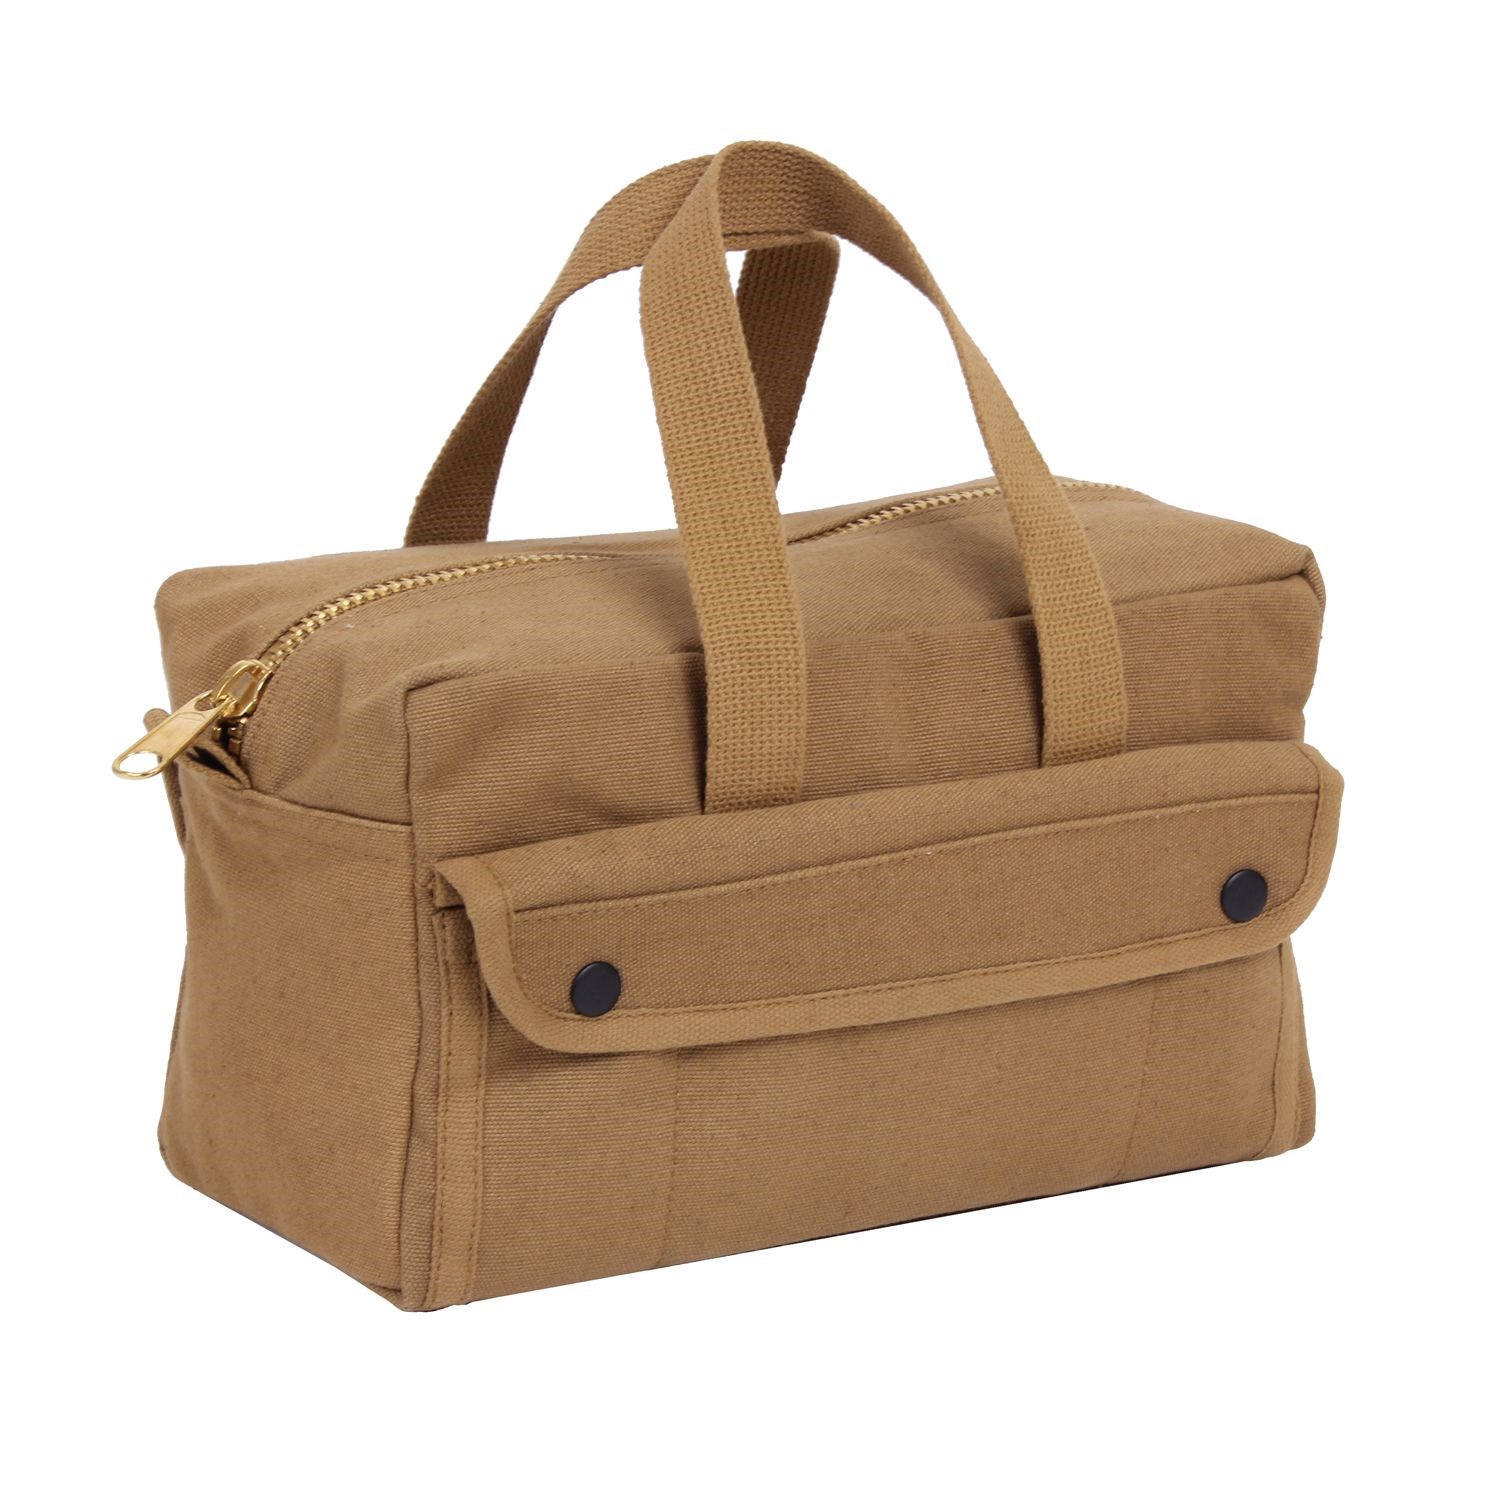 ROTHCO MECHANIC bag with zipper brass 28 x 18 x 15 cm COYOTE | MILITARY ...